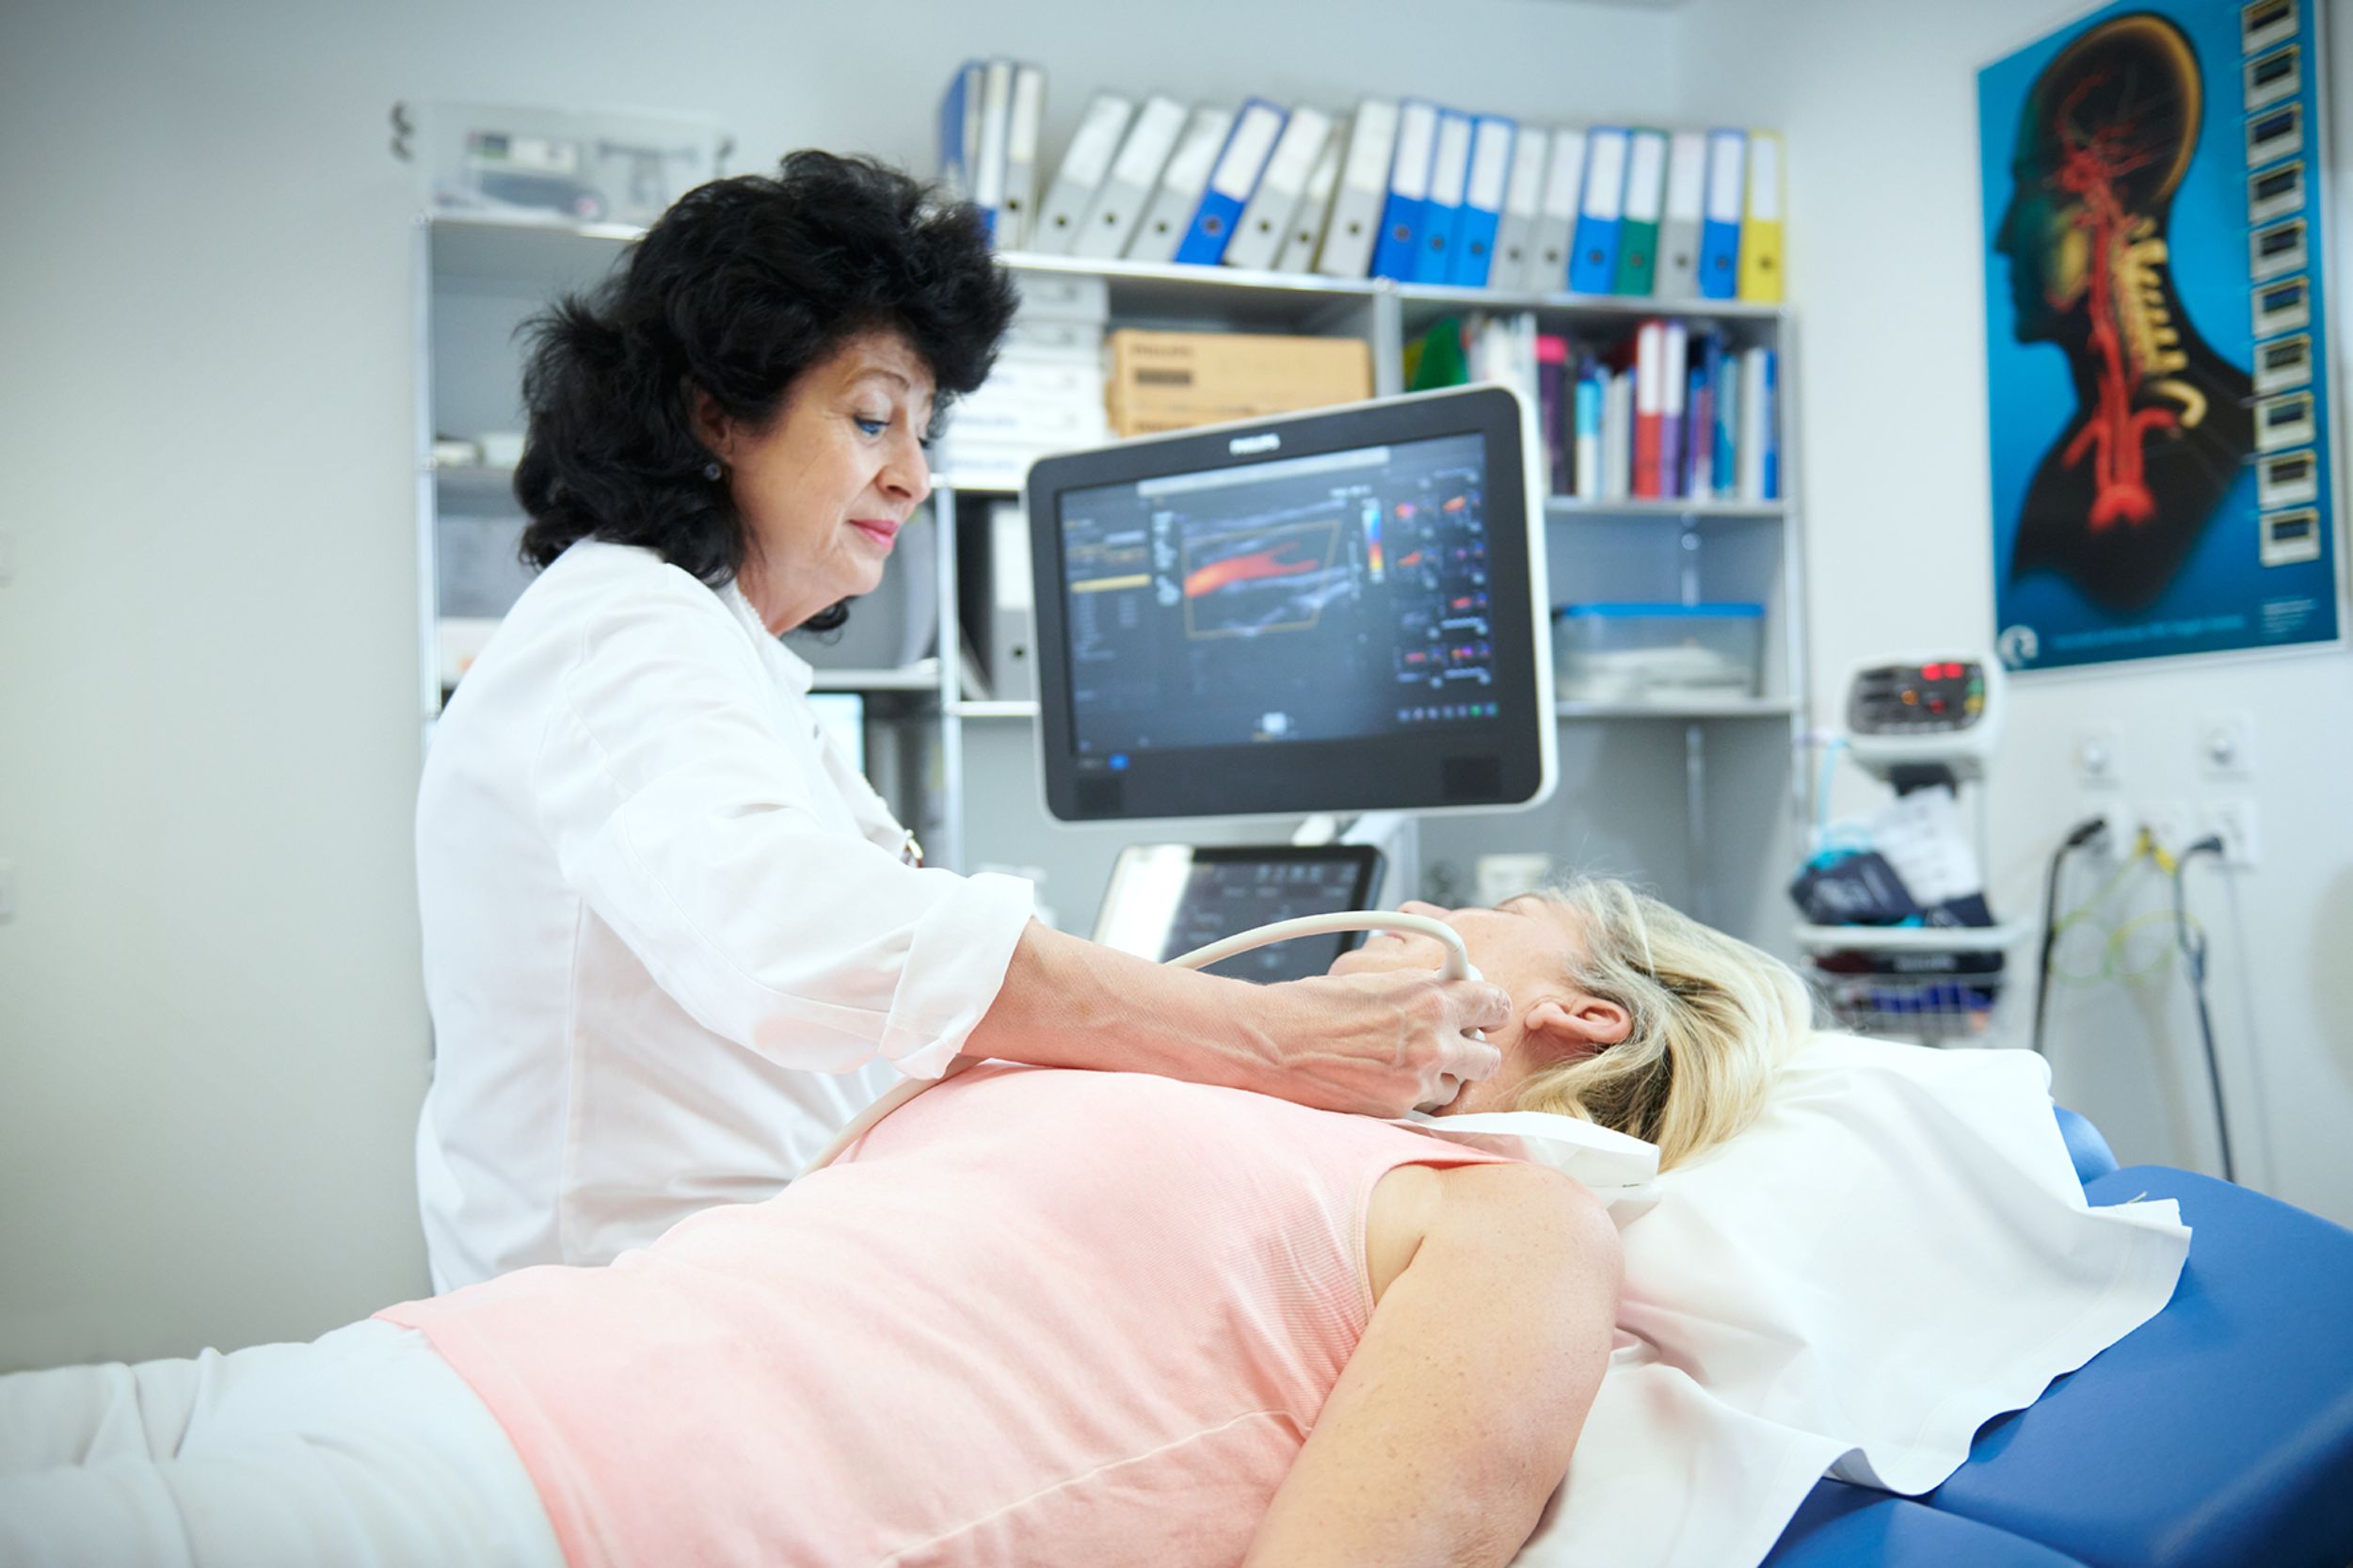 Physician performs neurovascular ultrasound examination on patient